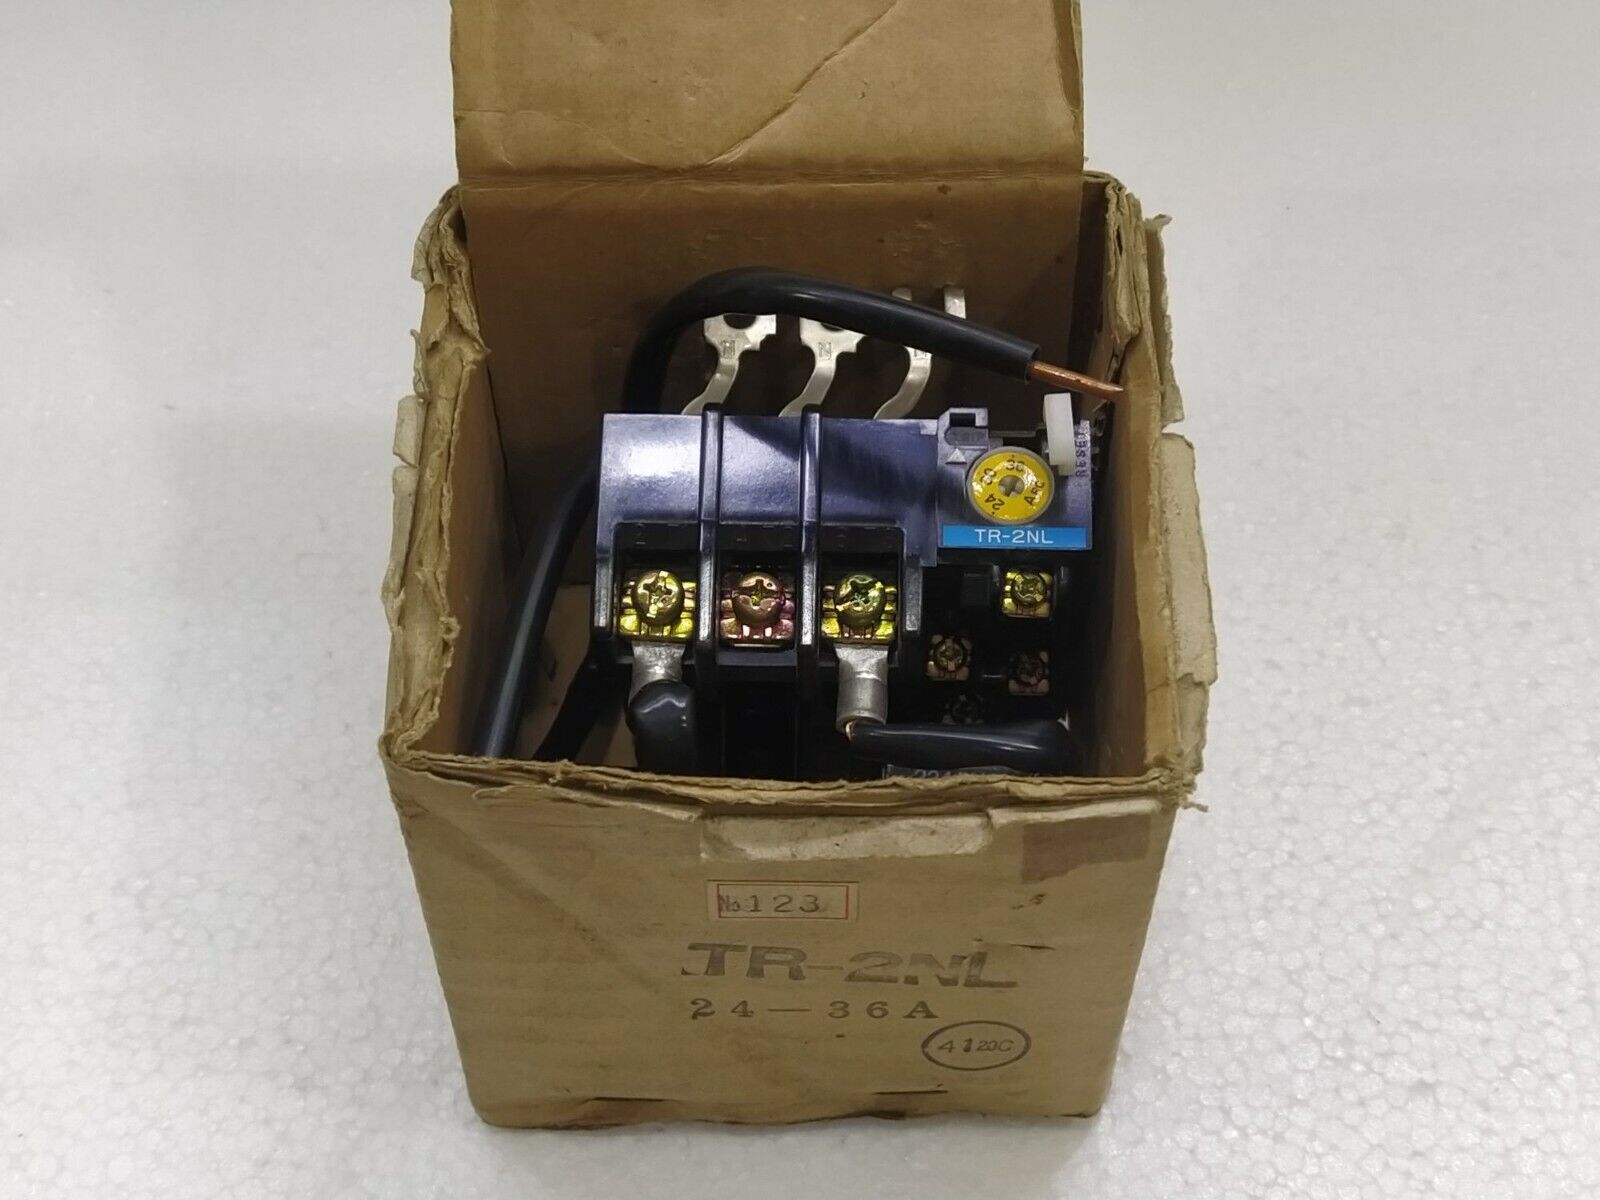 Fuji TR-2NL Thermal Overload Relay 24-36A JEM TR2NL